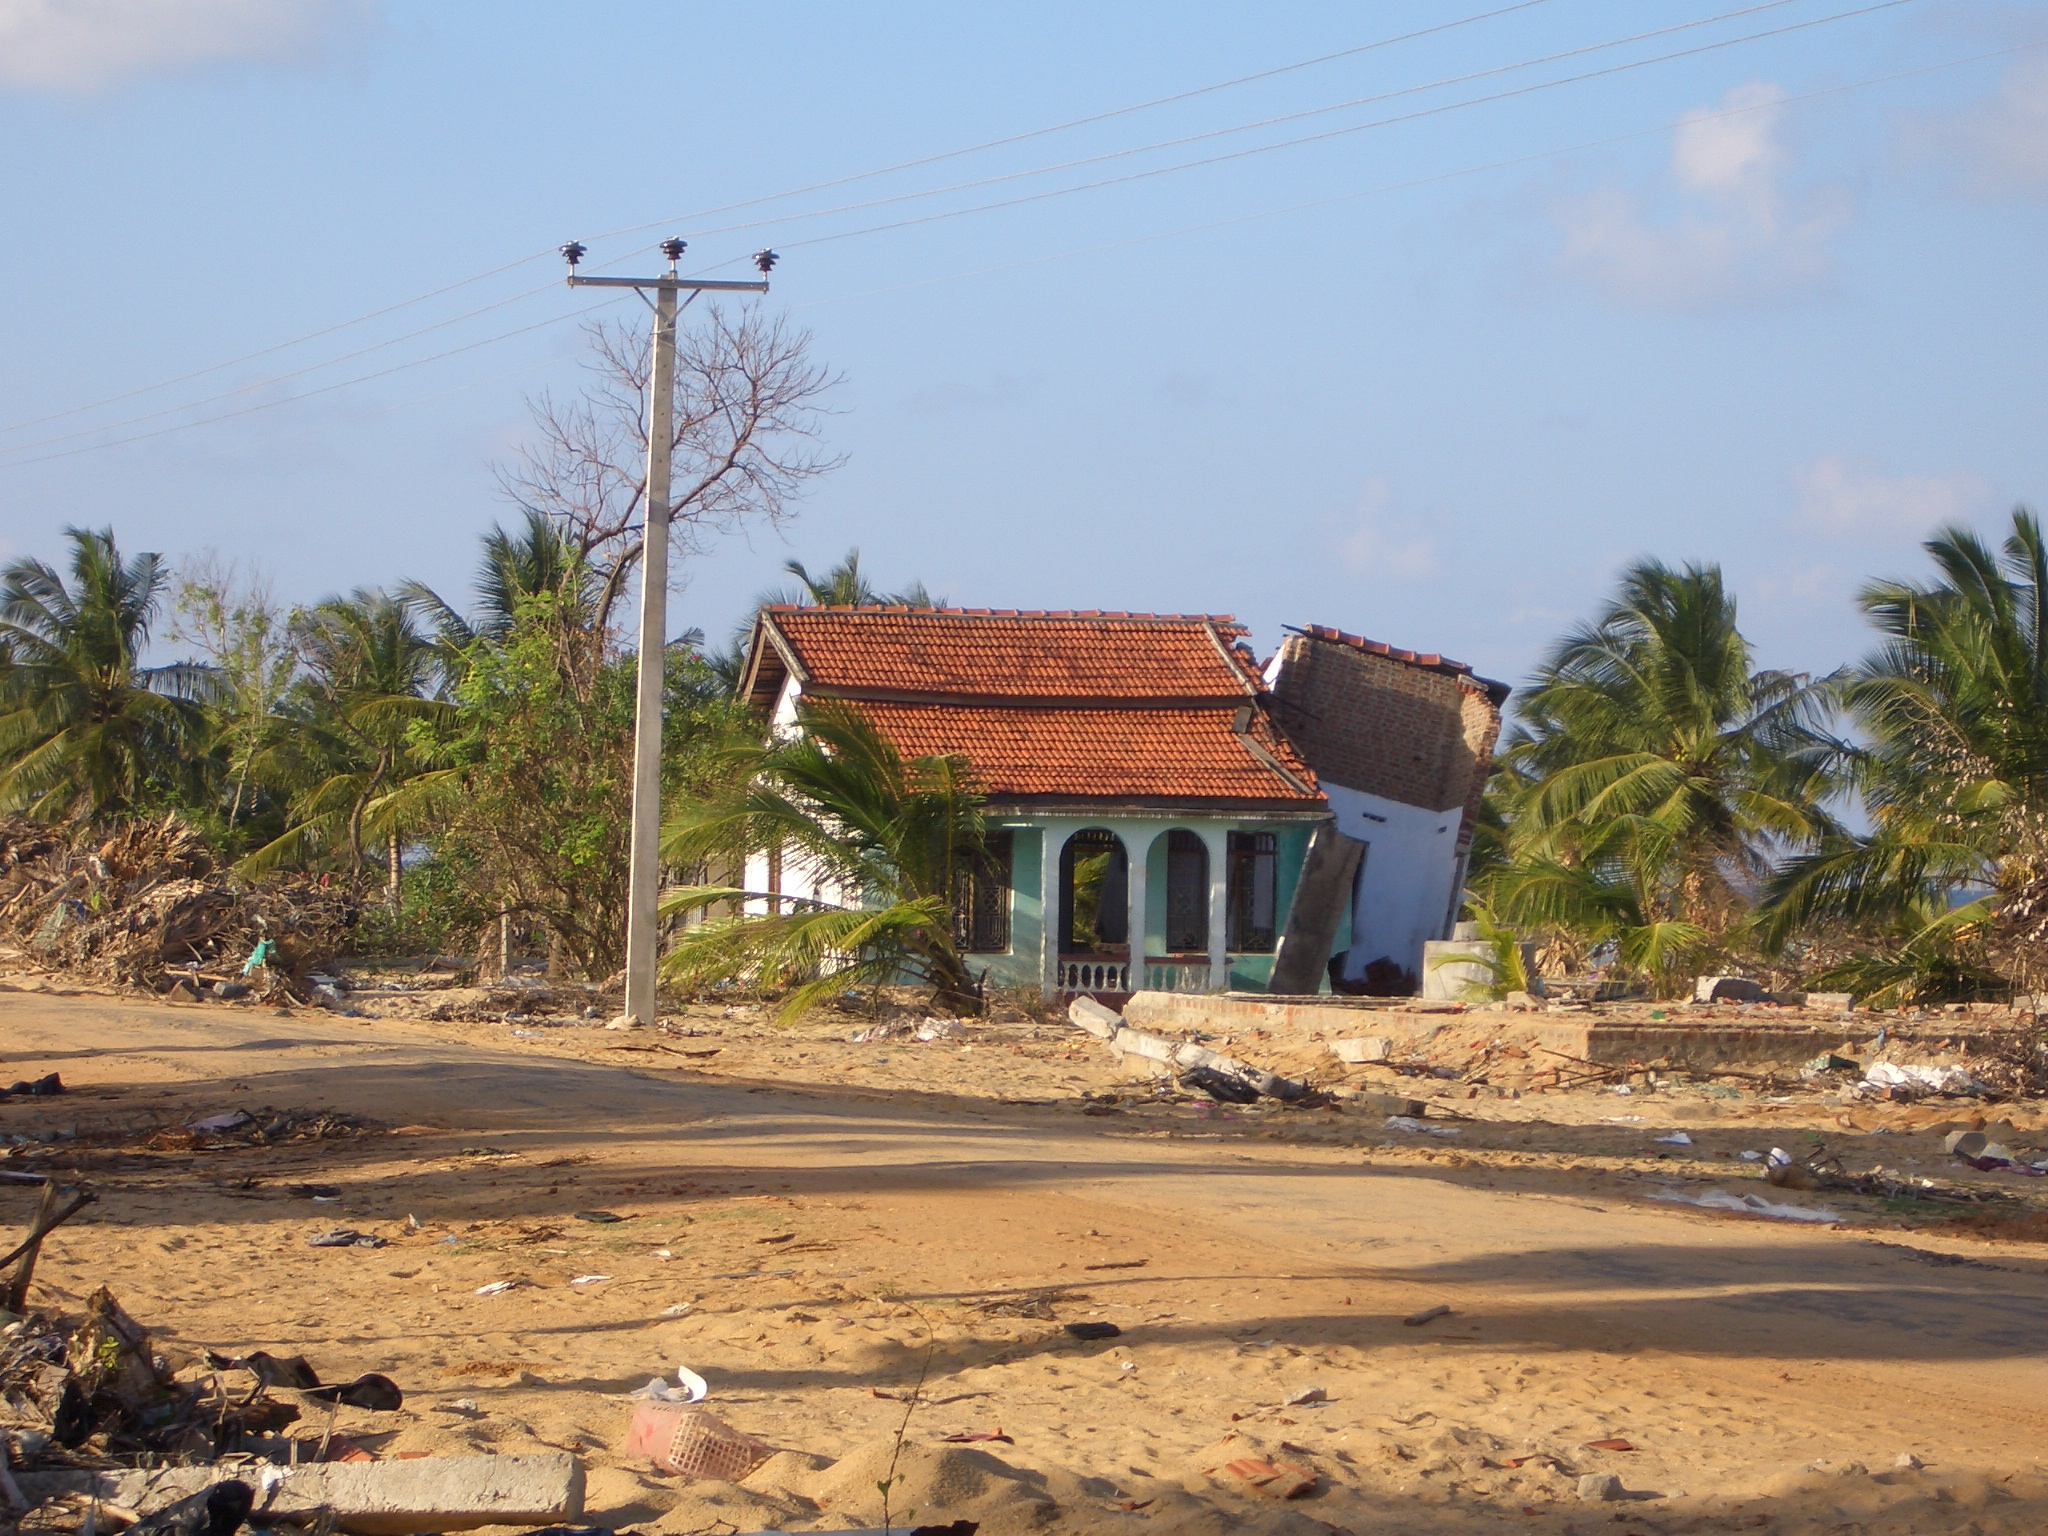 A damaged house in Sri Lanka, after the Boxing Day tsunami of 2004